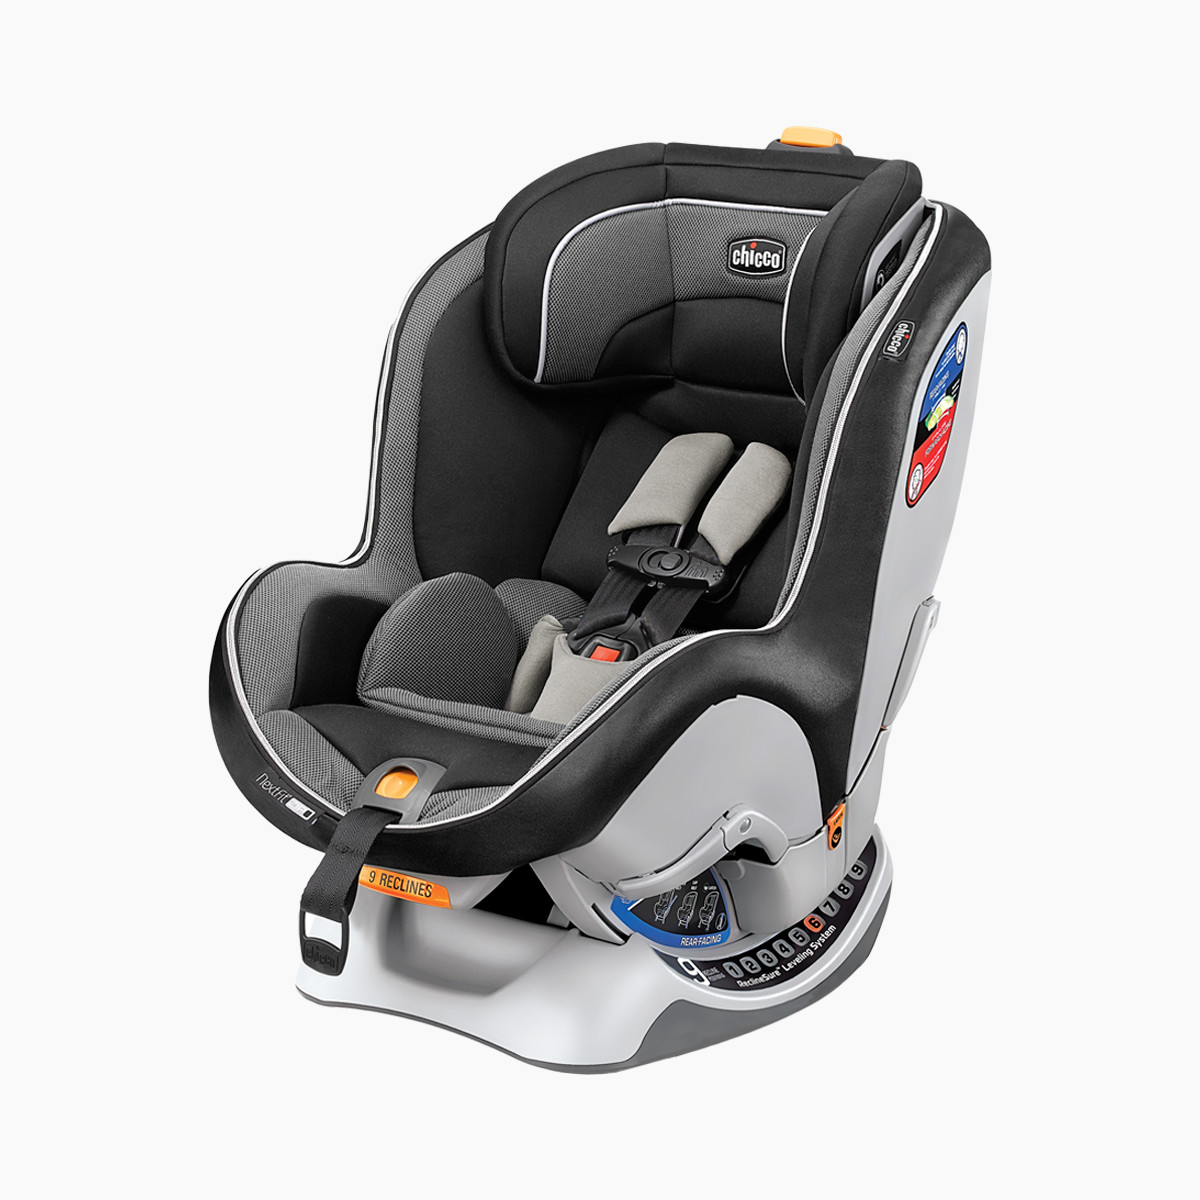 Chicco NextFit Zip Convertible Car Seat - Notte.